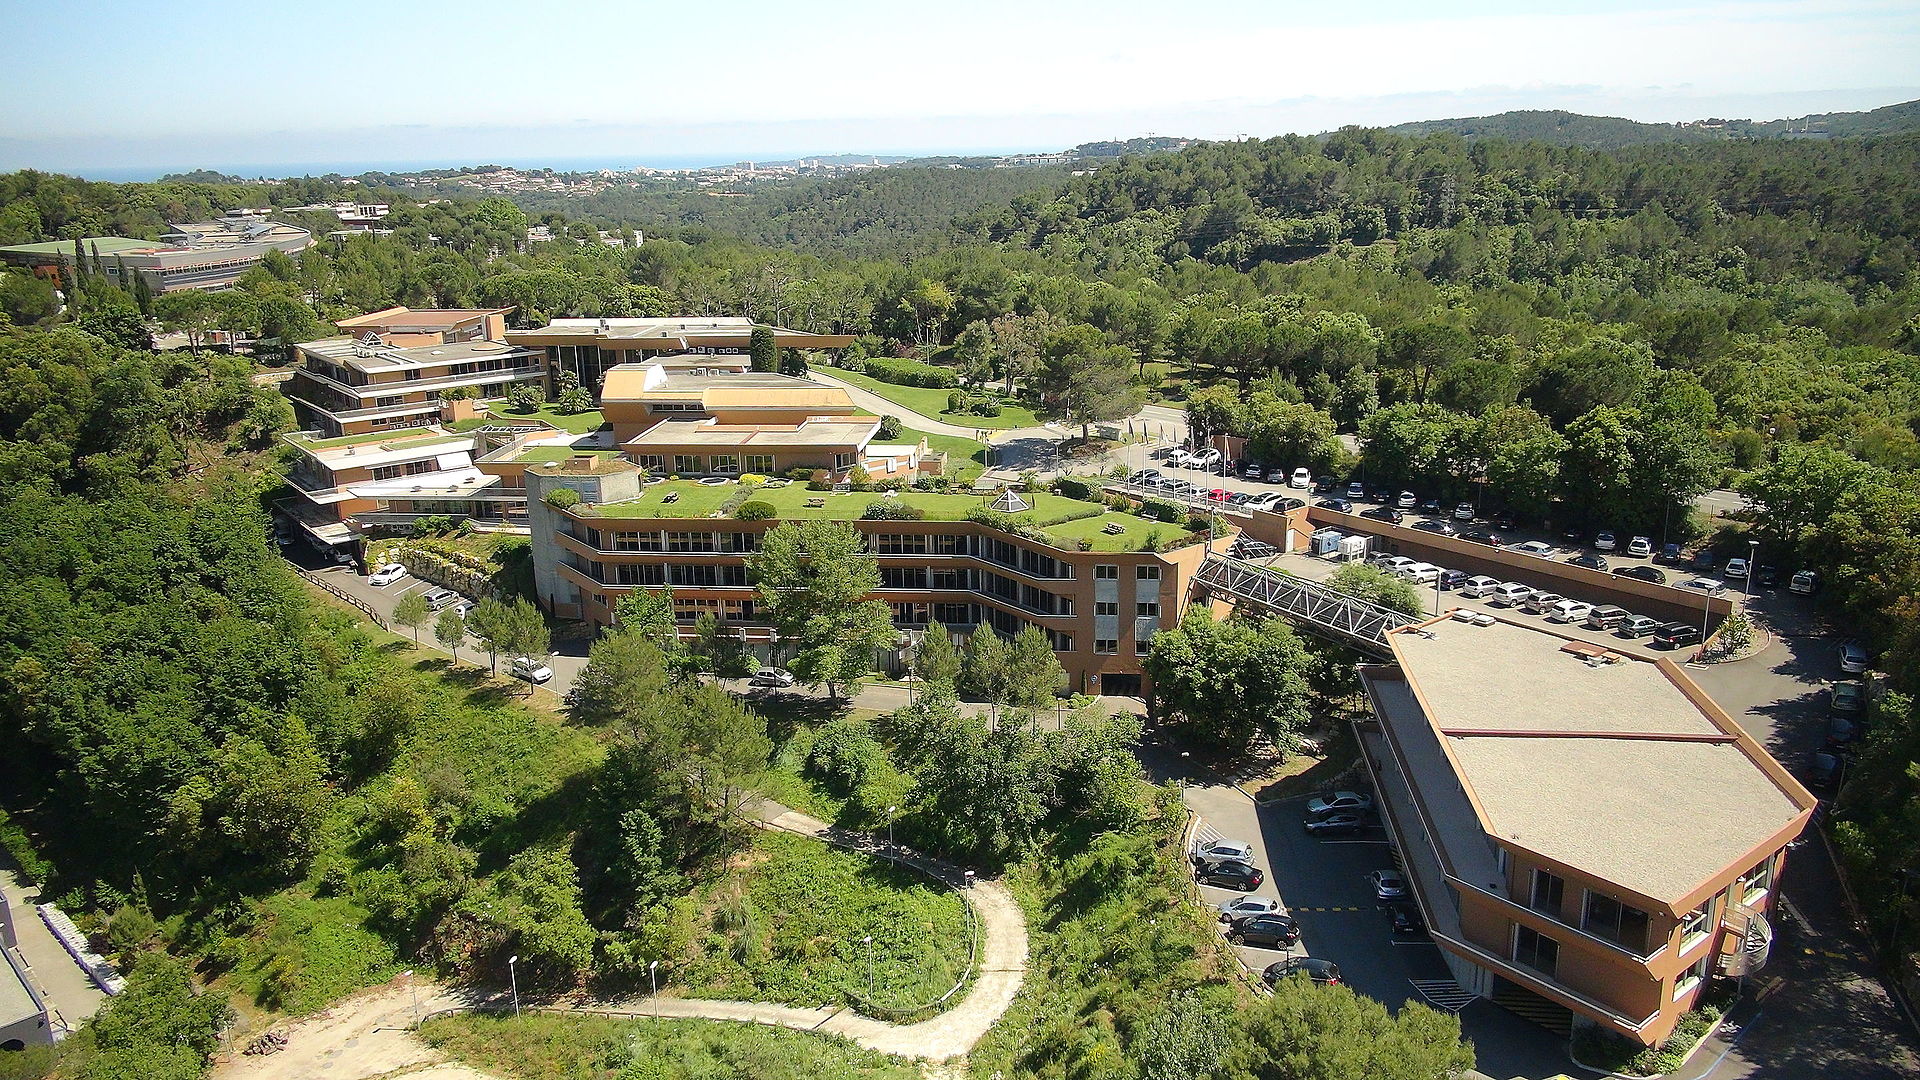 Sophia Antipolis, the French city of science